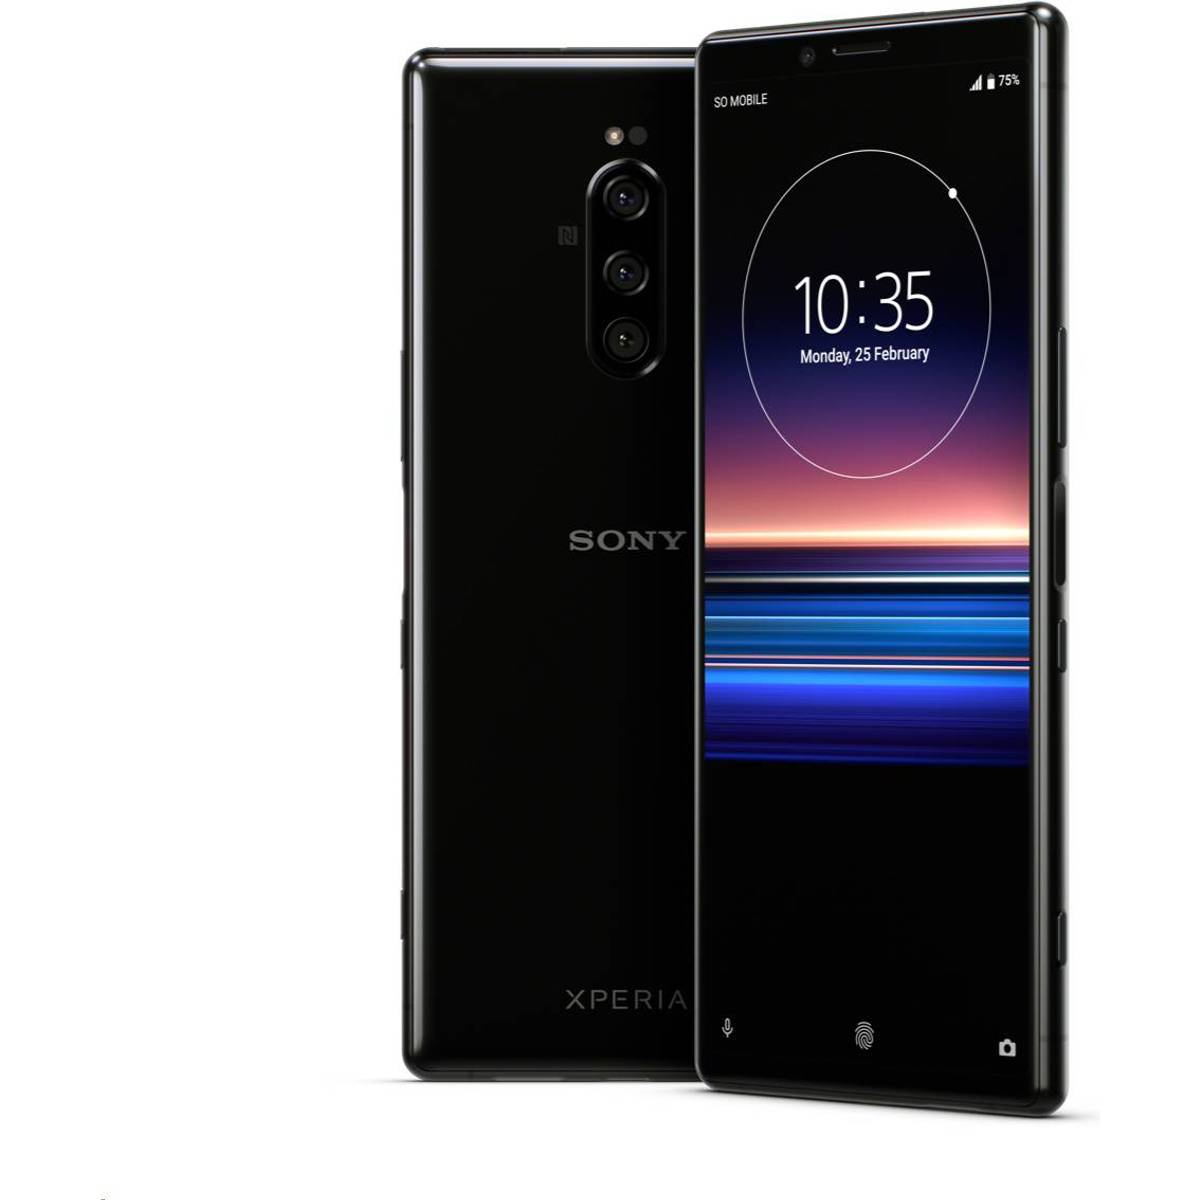 Sony Xperia 1 Find The Lowest Price Save Money At Pricerunner